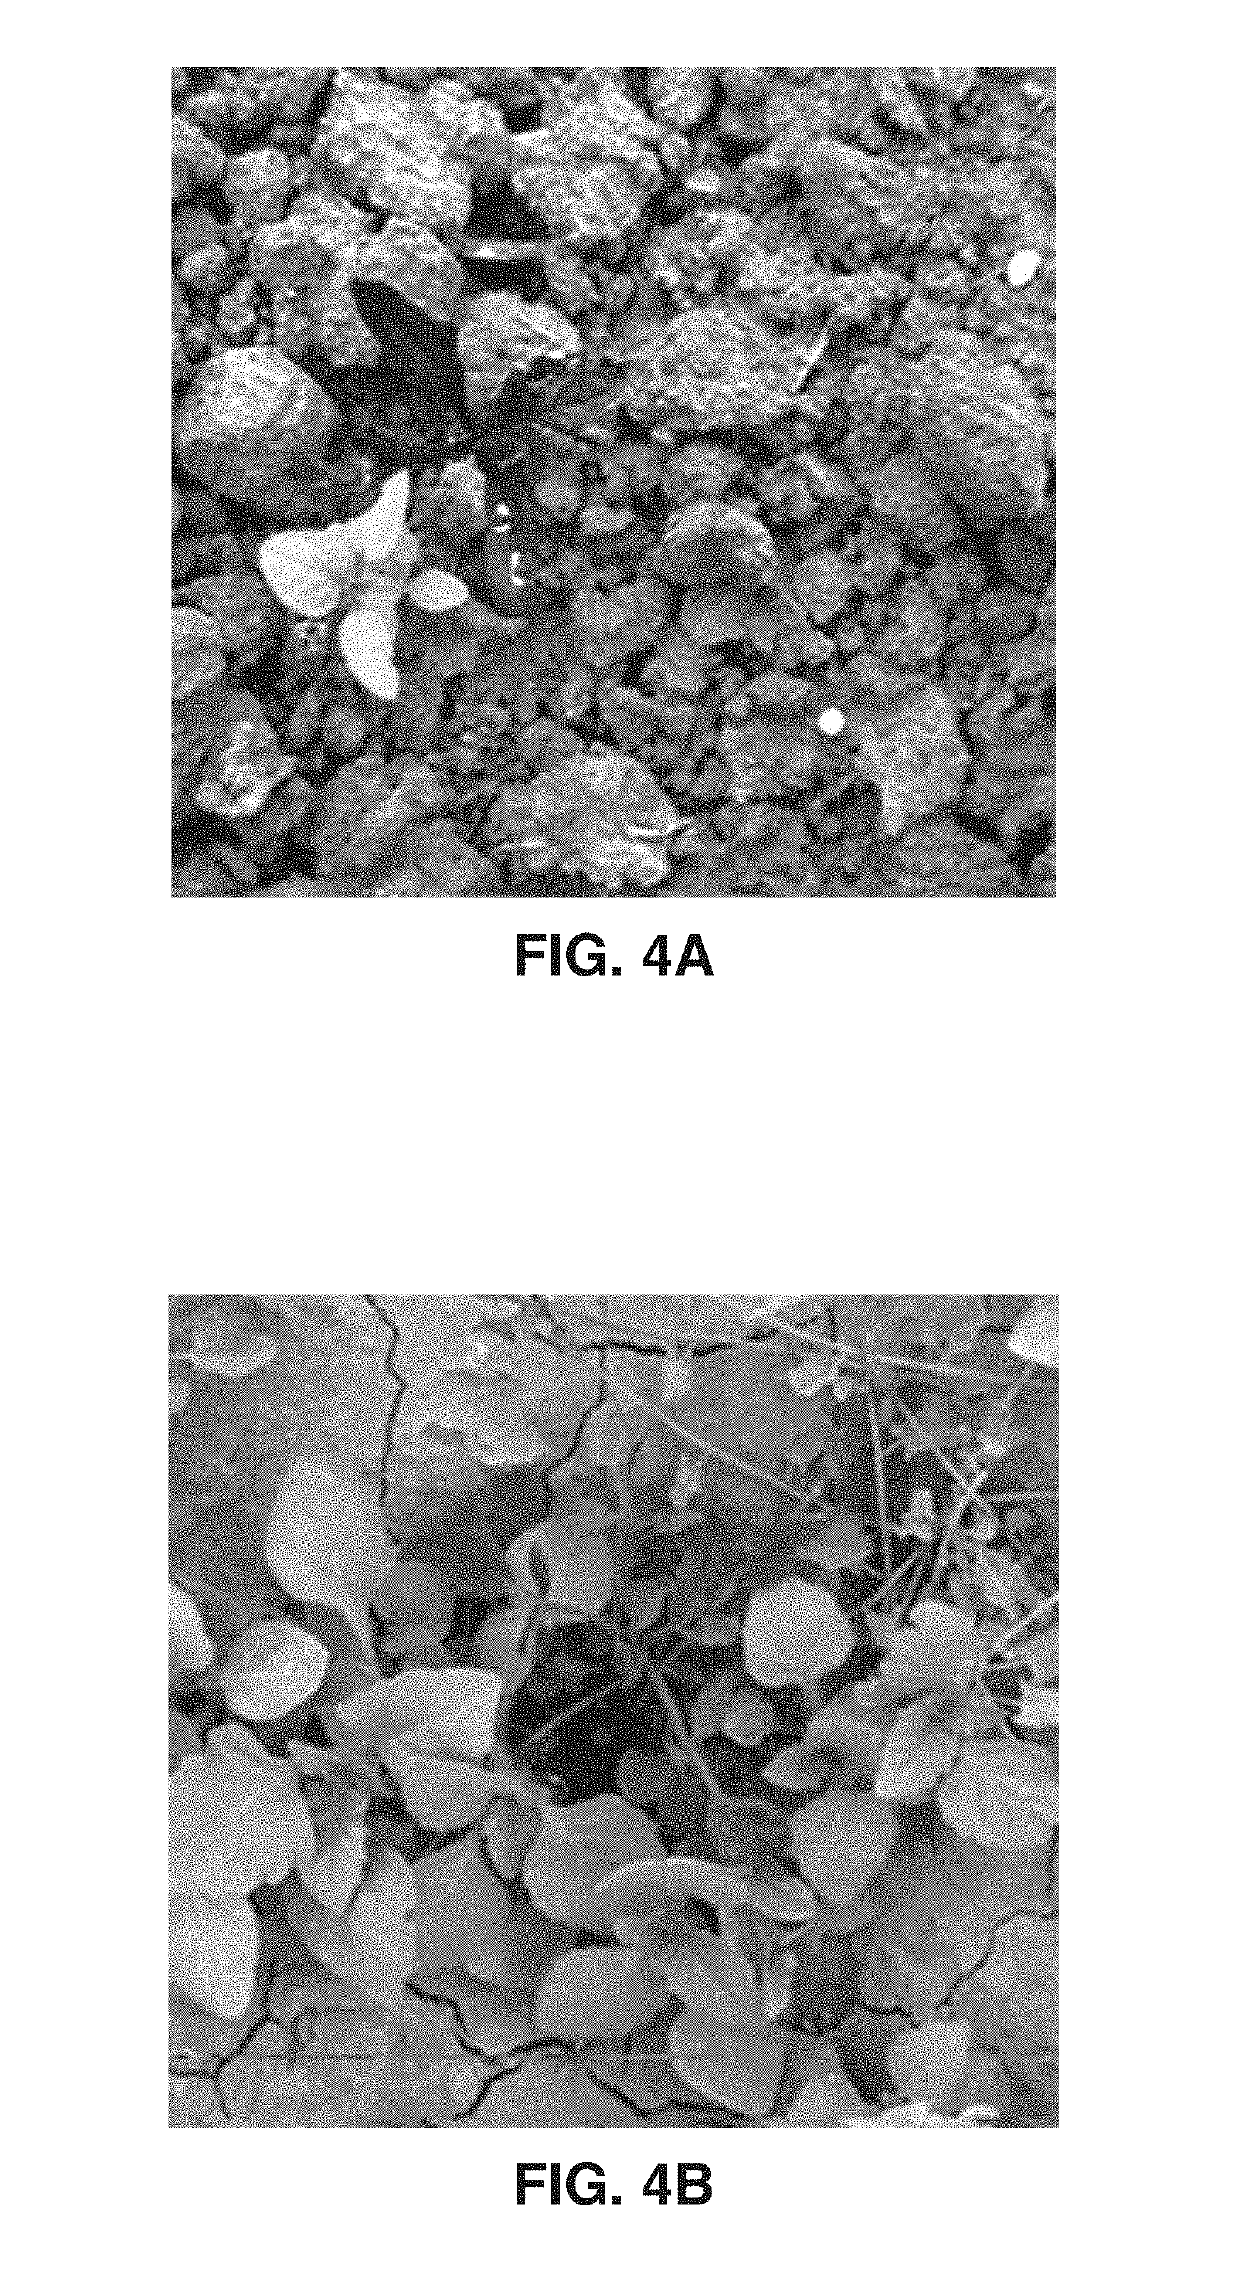 Robotic plant care systems and methods